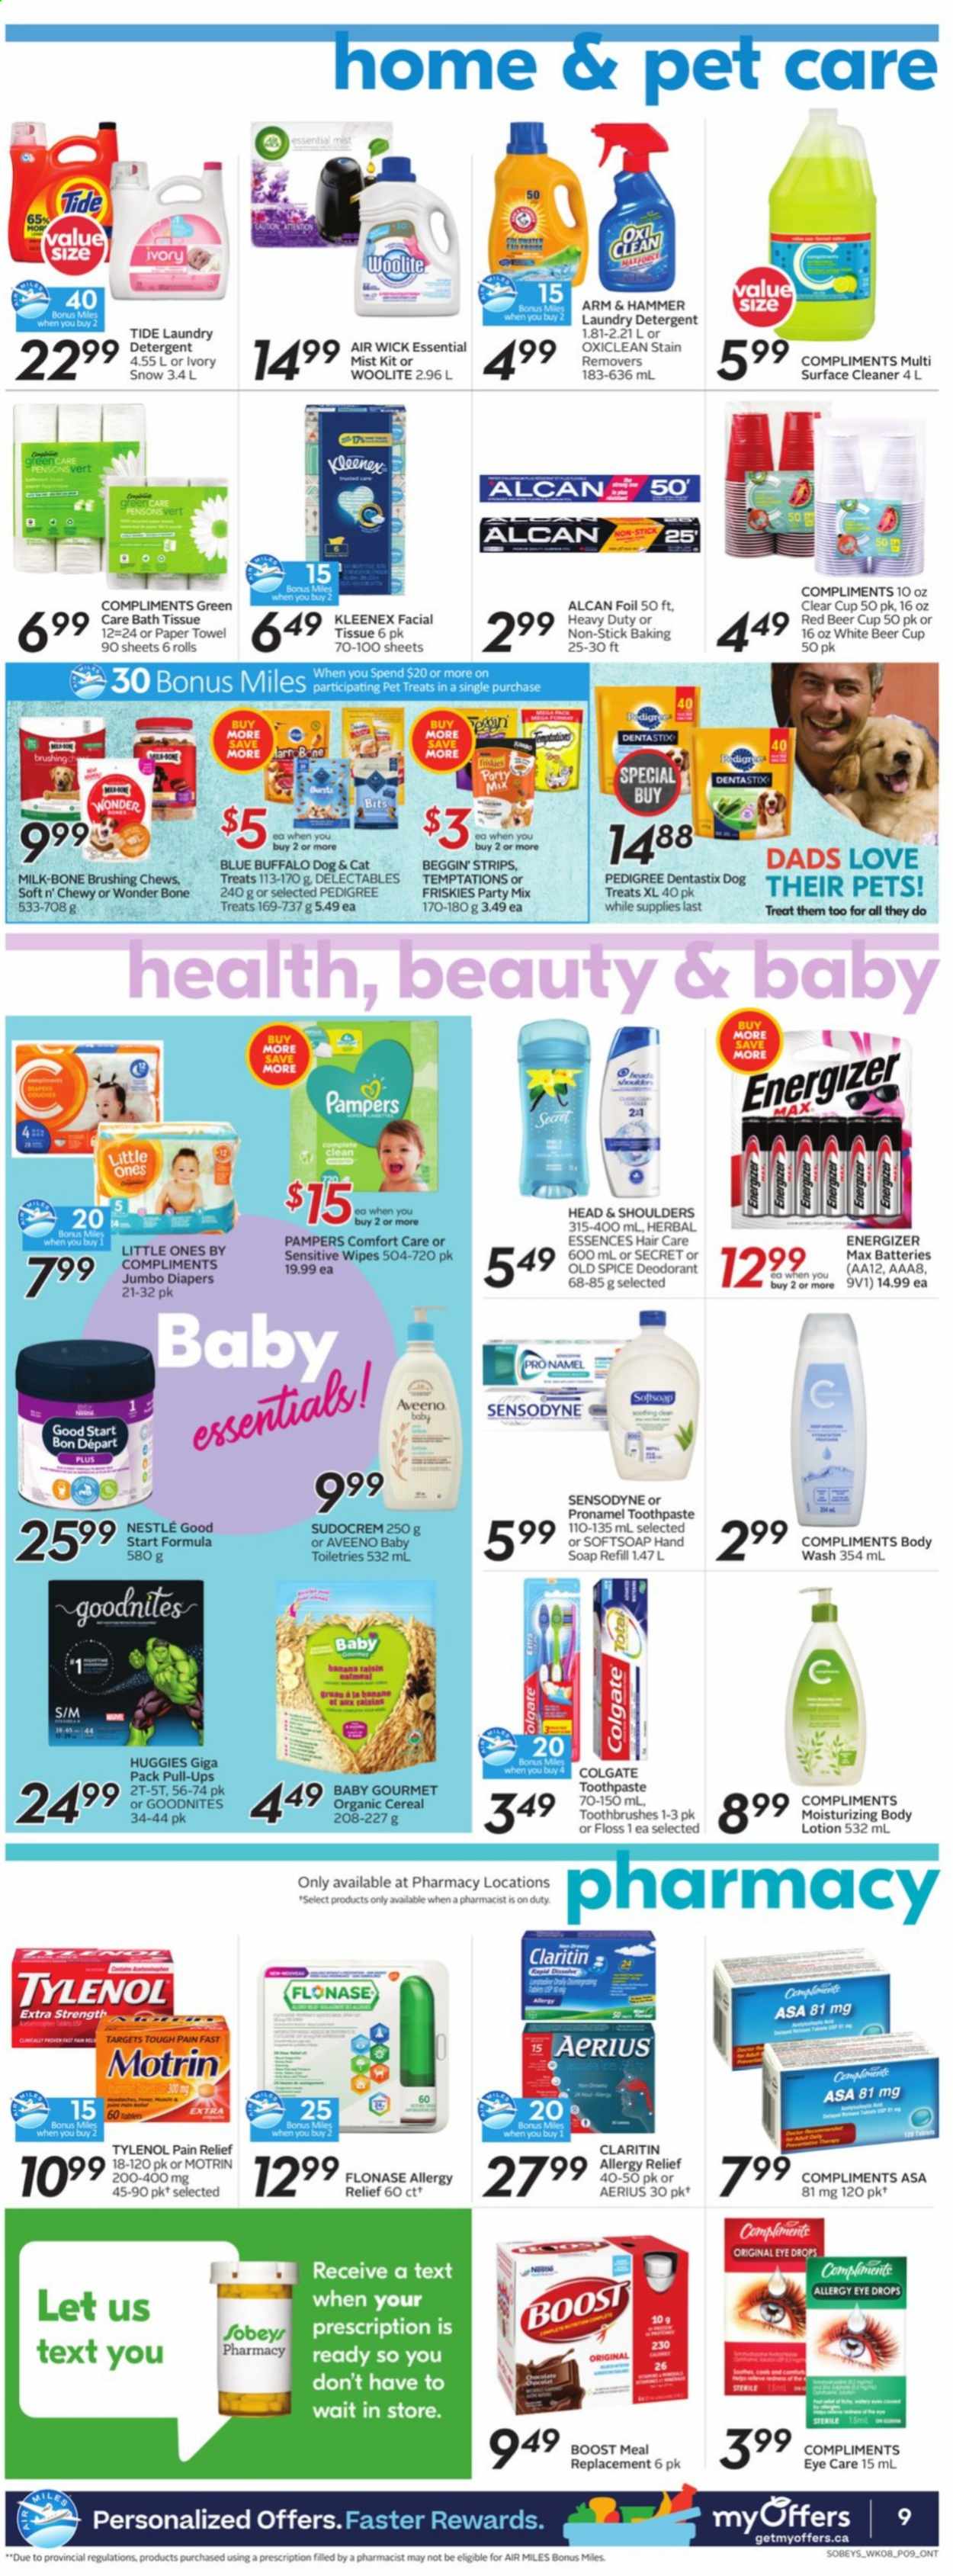 thumbnail - Sobeys Flyer - June 17, 2021 - June 23, 2021 - Sales products - milk, strips, chewing gum, ARM & HAMMER, cereals, spice, Boost, beer, wipes, nappies, Aveeno, bath tissue, Kleenex, paper towels, surface cleaner, cleaner, Woolite, OxiClean, Tide, laundry detergent, body wash, Softsoap, hand soap, soap, toothpaste, Herbal Essences, body lotion, anti-perspirant, Blue Buffalo, Dentastix, Pedigree, Beggin', Friskies, pain relief, Tylenol, eye drops, allergy relief, Sudocrem, Motrin, Nestlé, Head & Shoulders, Huggies, Pampers, Old Spice, Sensodyne, deodorant. Page 9.